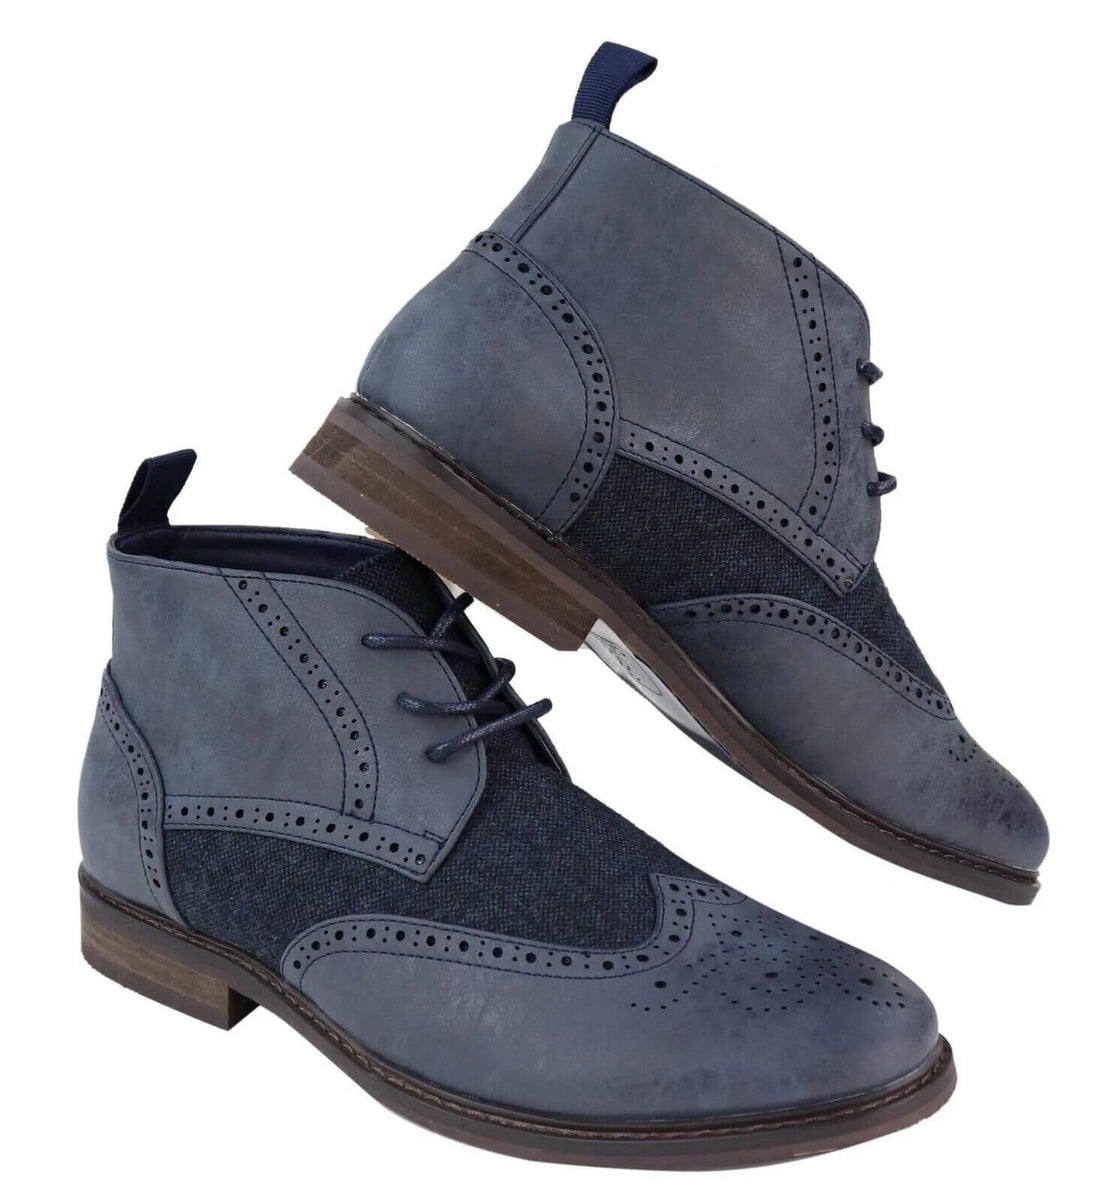 Mens Classic Tweed Oxford Brogue Ankle Boots in Blue Leather - Upperclass Fashions 